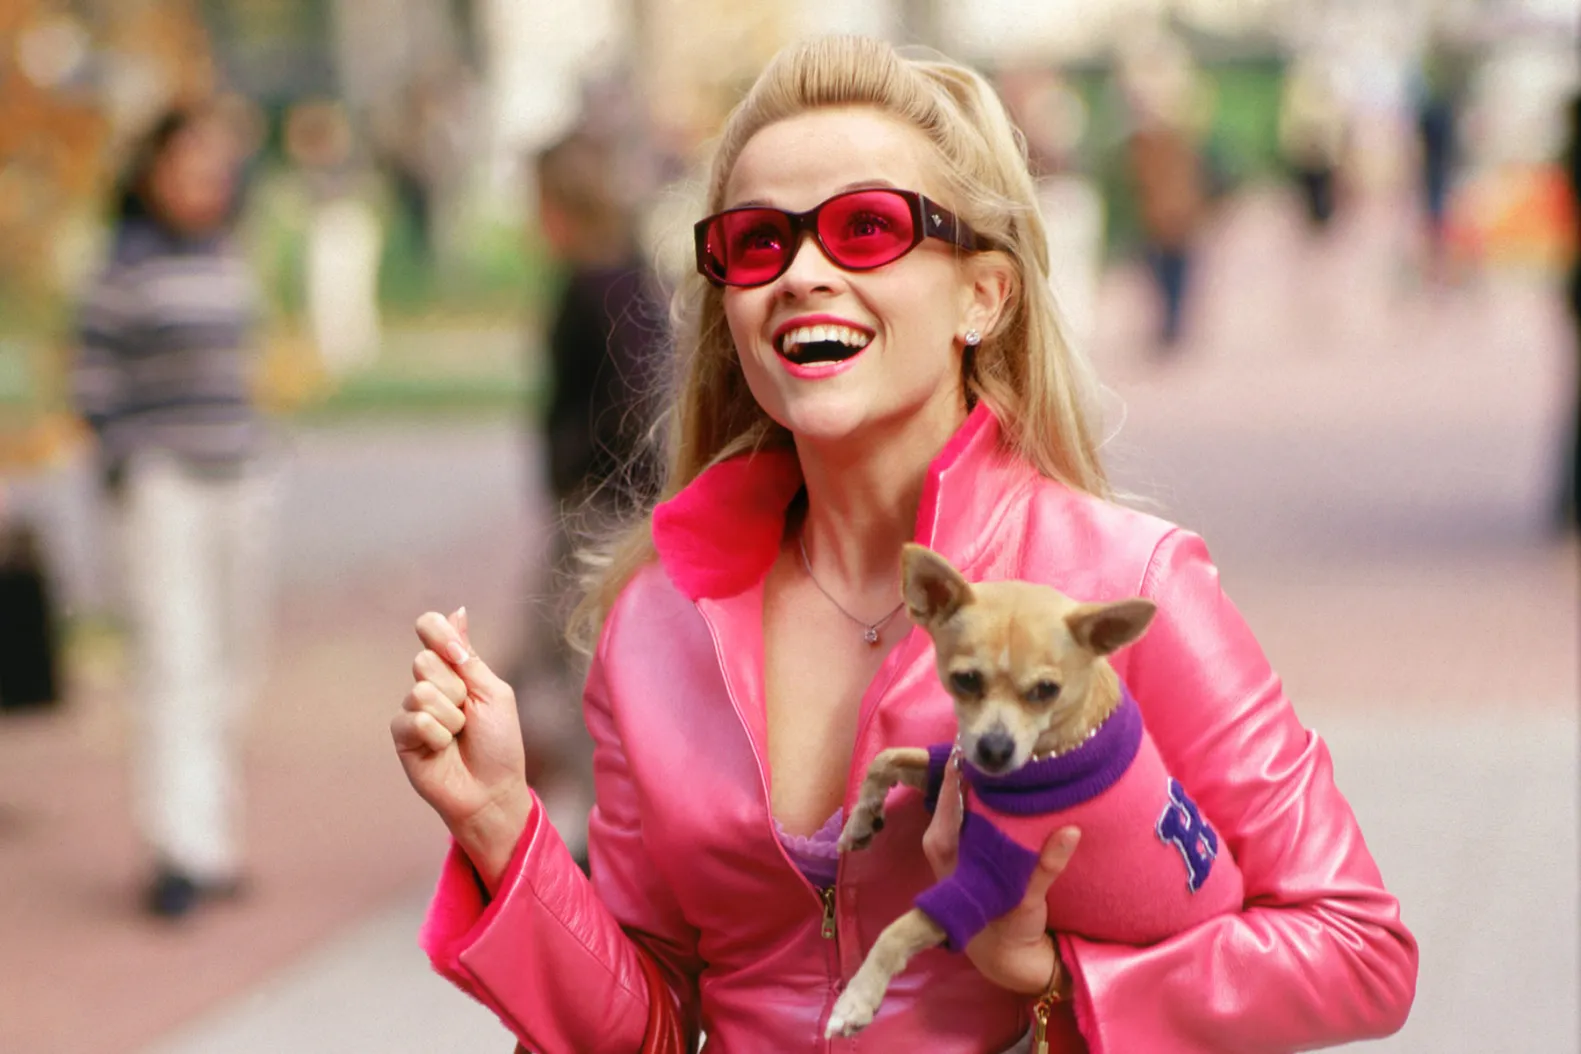 Check Out Reese Witherspoon's Throwback to the 90s: 'Elle,' A New Legally Blonde Series, Hits Amazon Prime!